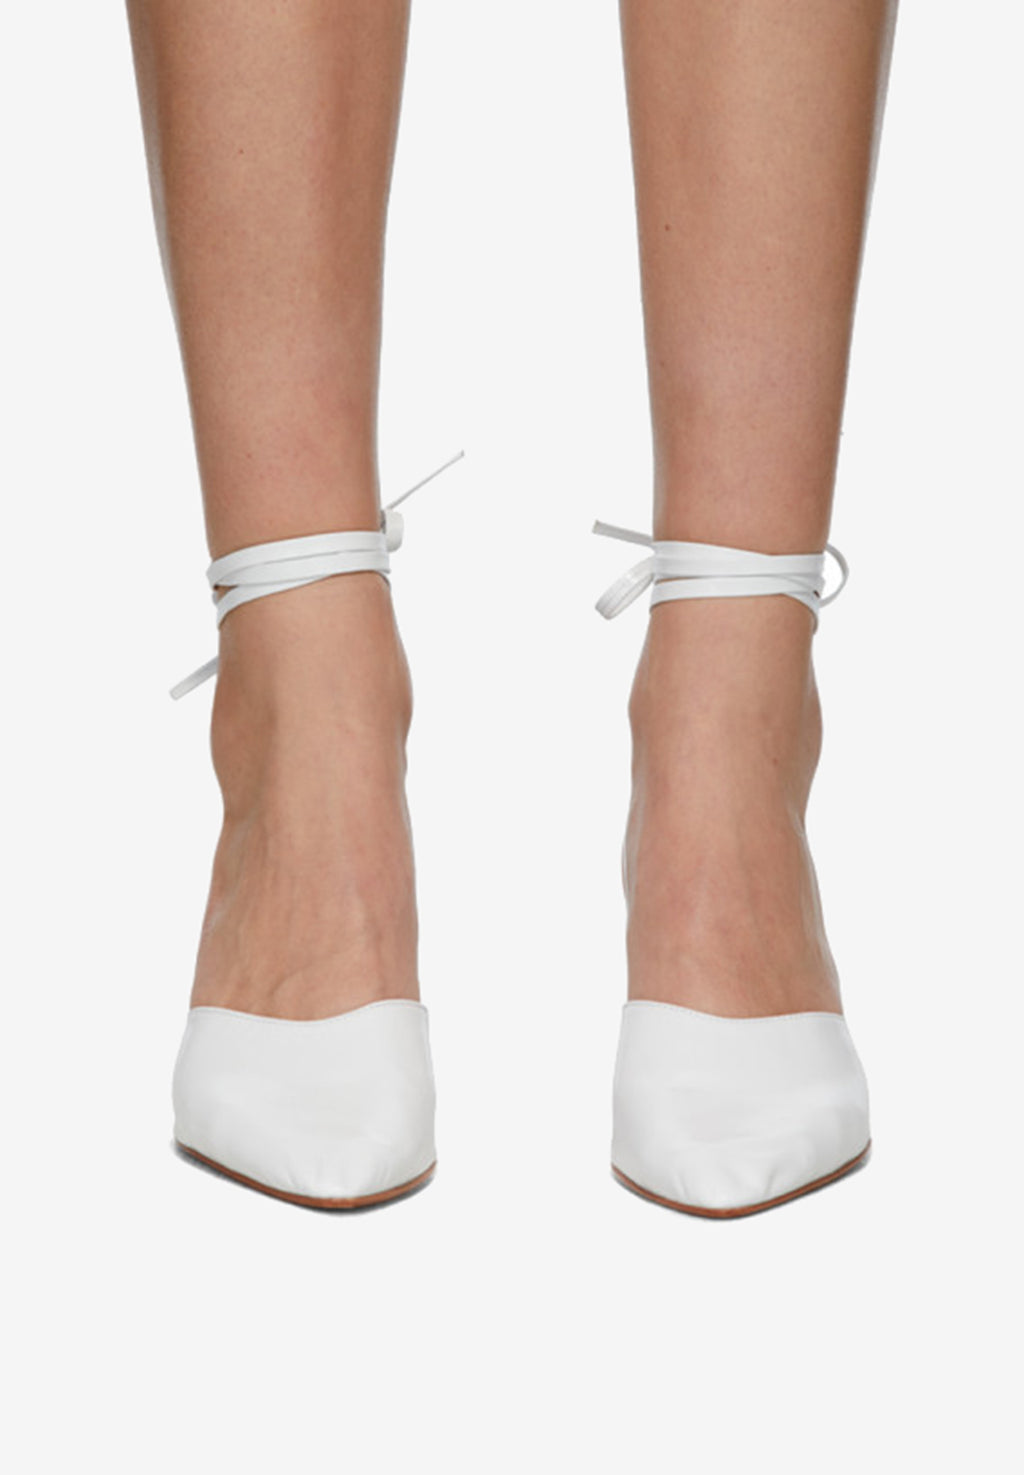 Martiniano - Party Sandal - white